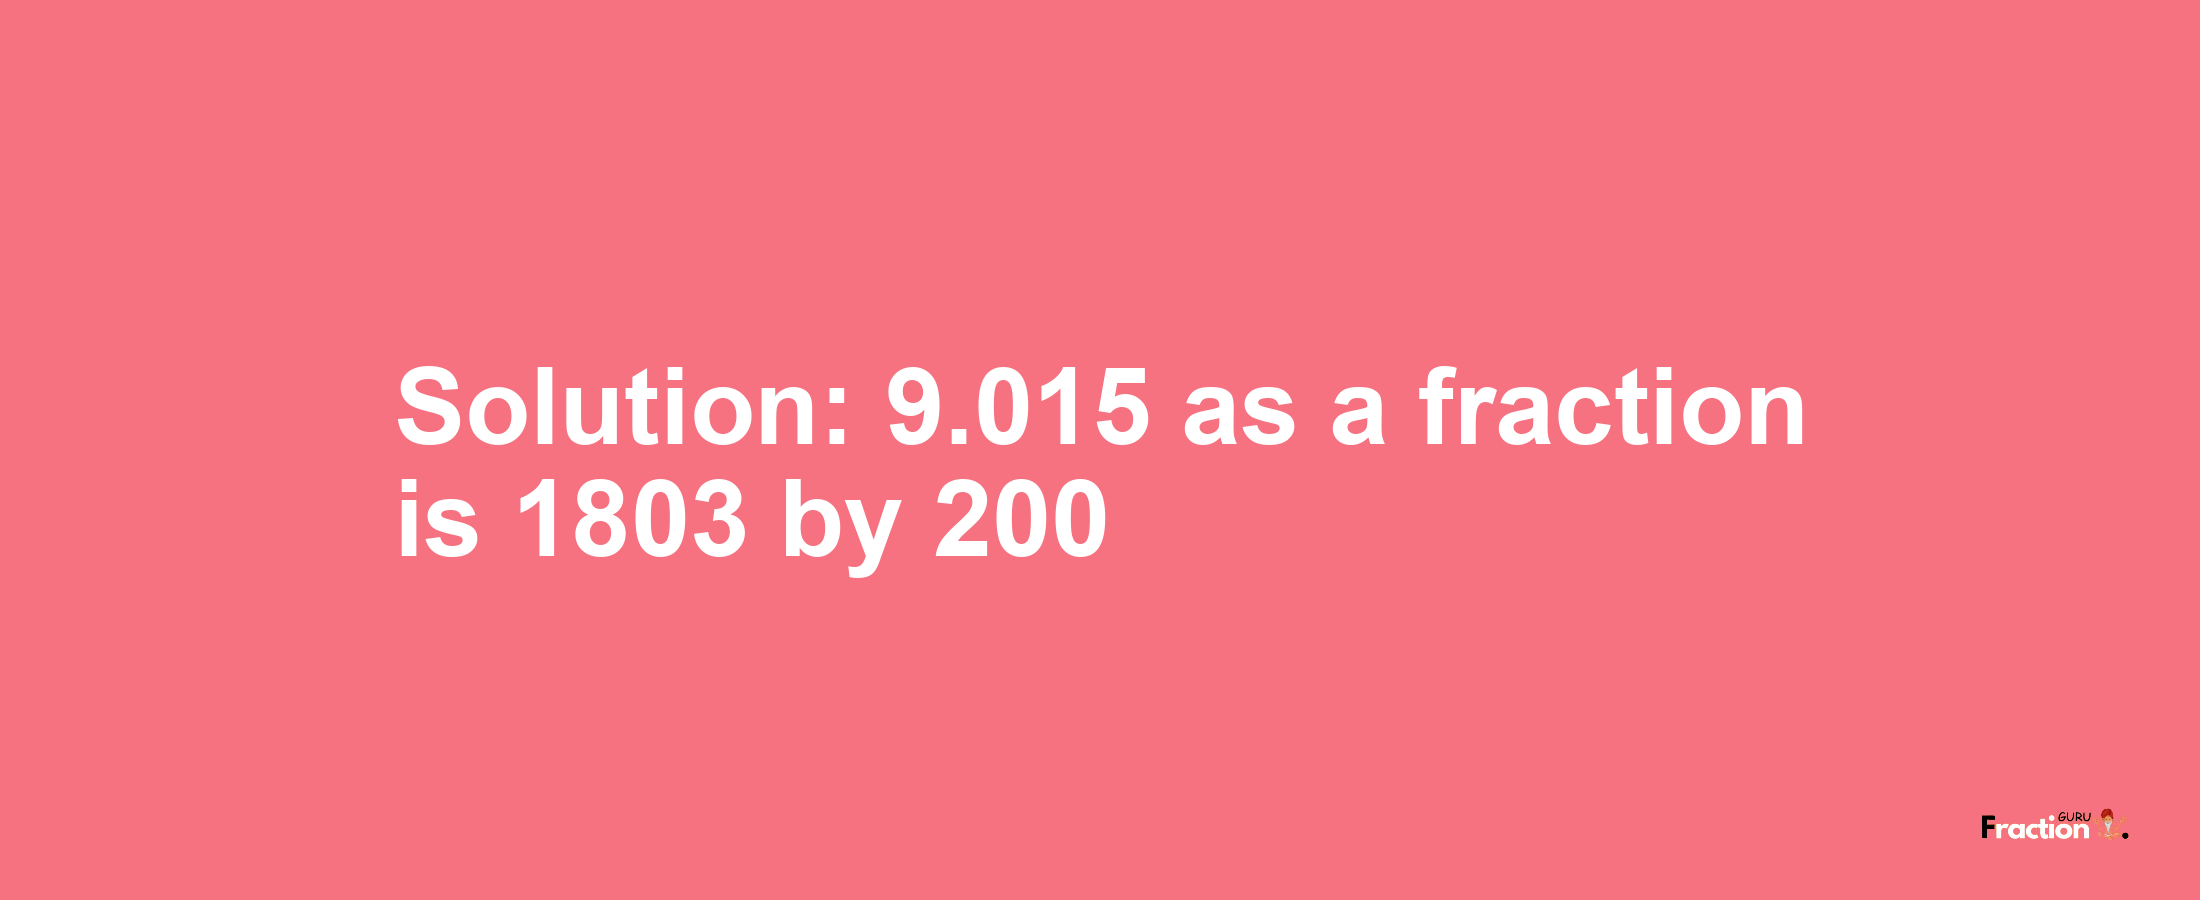 Solution:9.015 as a fraction is 1803/200